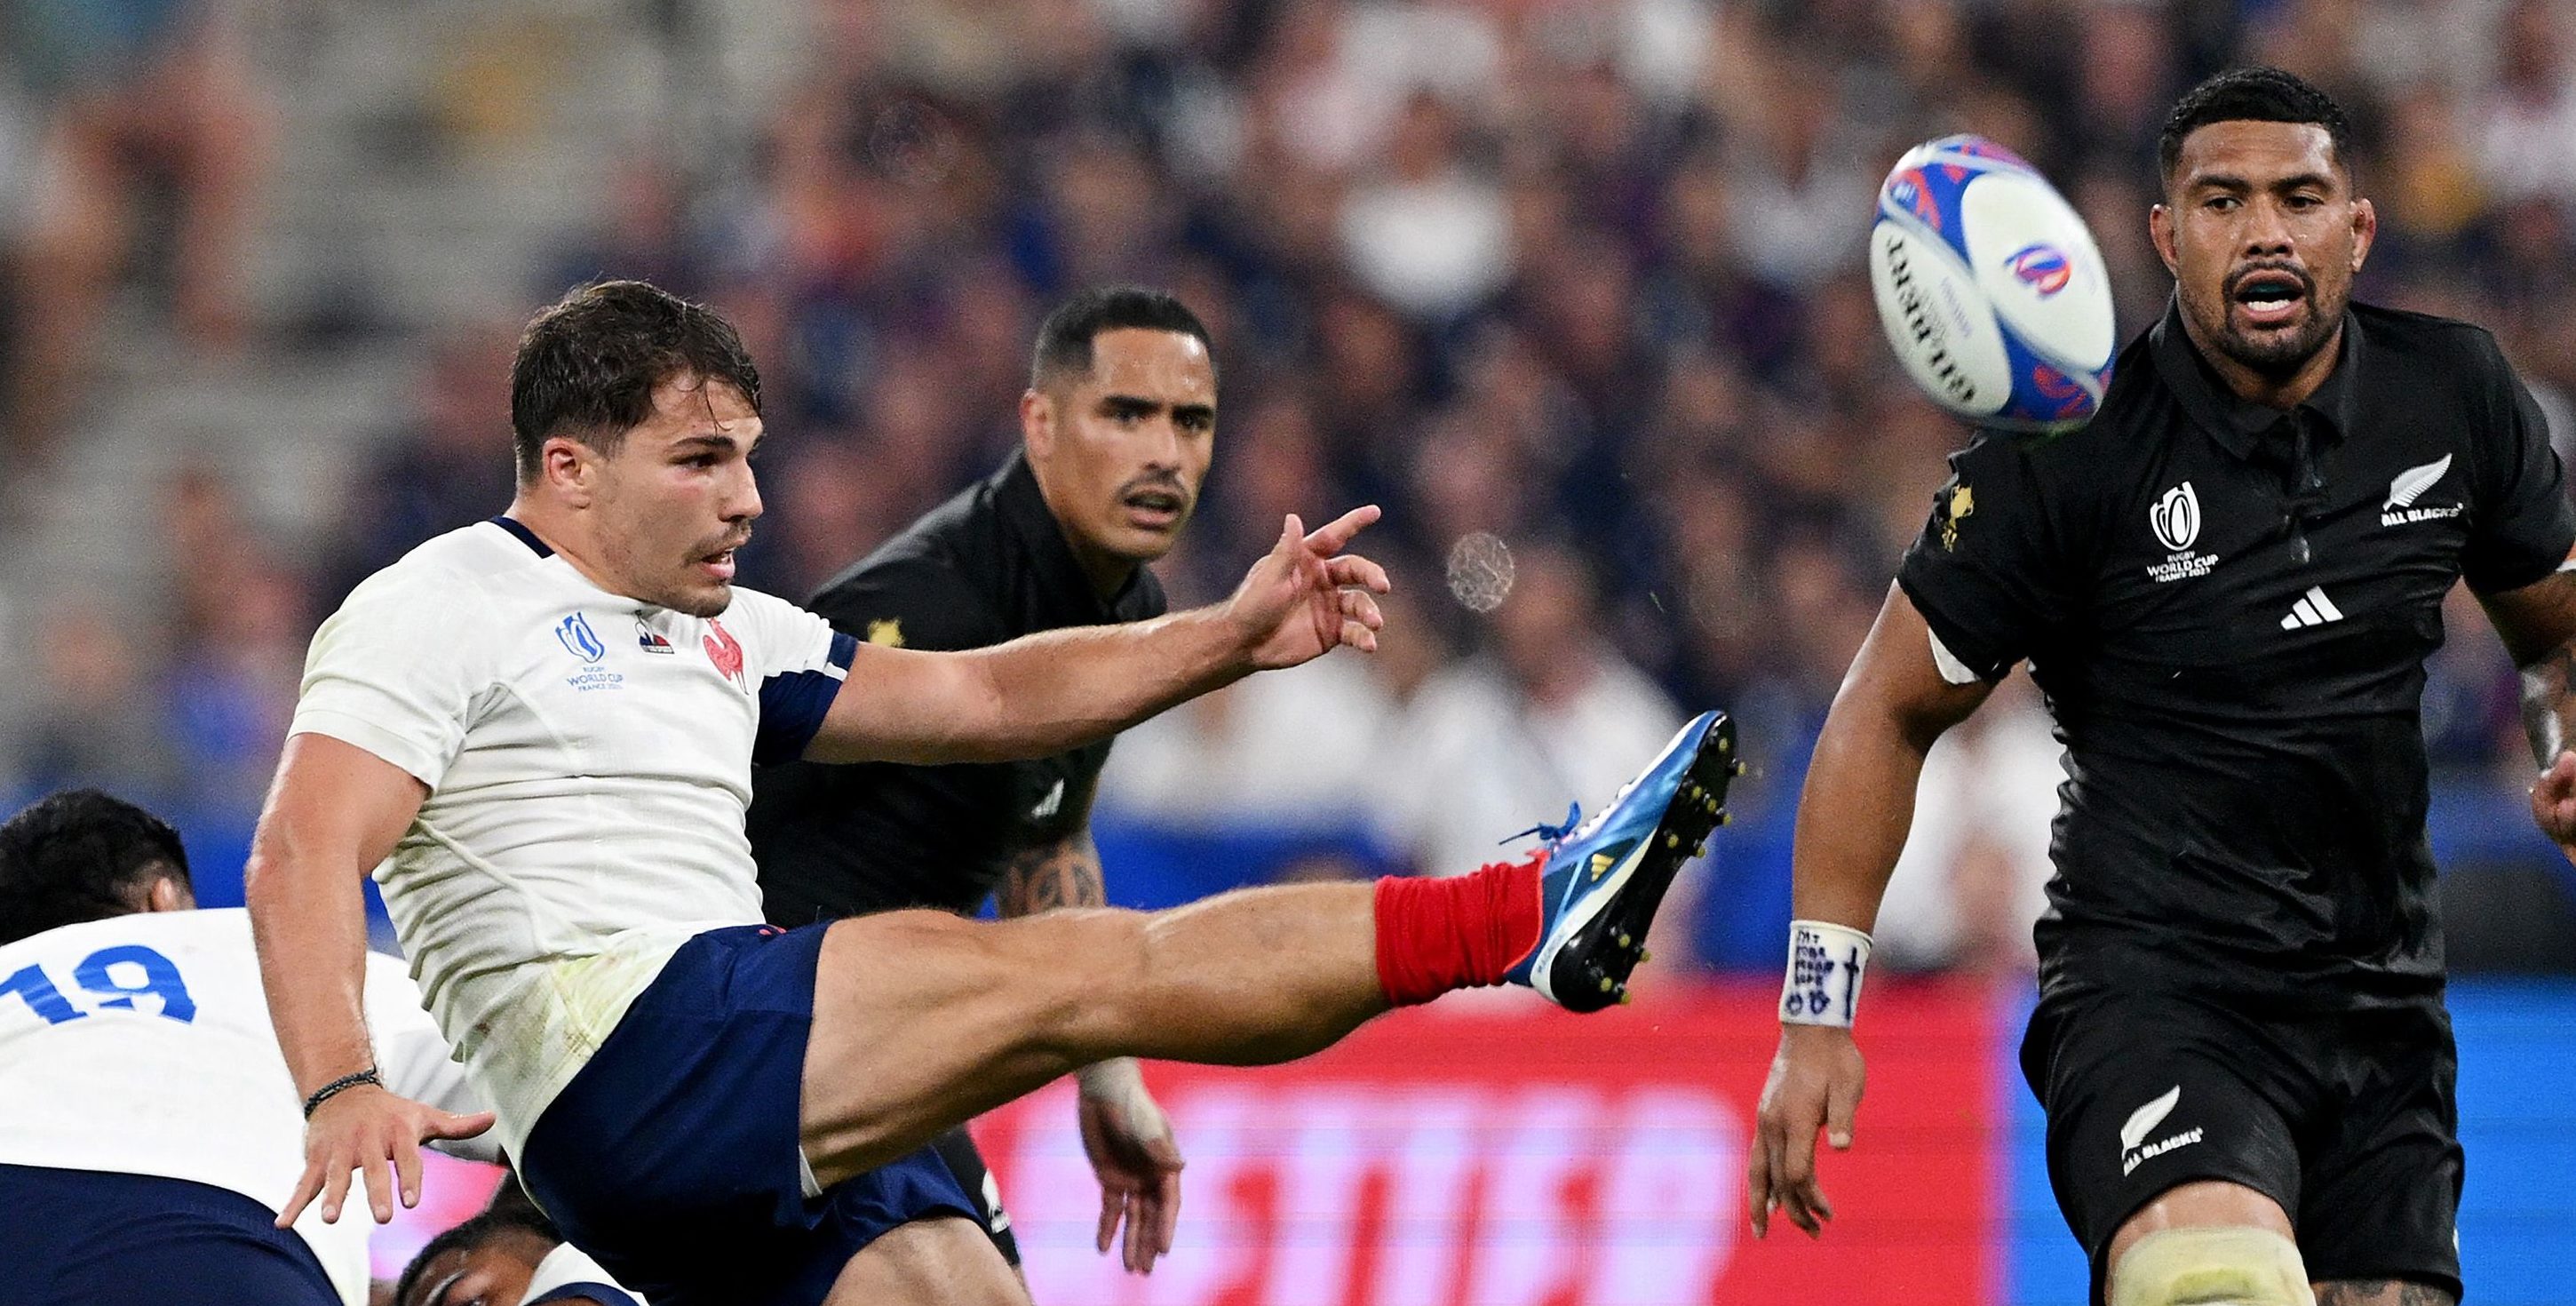 PARIS, FRANCE - SEPTEMBER 08: Antoine Dupont of France plays a kick from the ruck during the Rugby World Cup France 2023 Pool A match between France and New Zealand at Stade de France on September 08, 2023 in Paris, France. (Photo by David Ramos - World Rugby/World Rugby via Getty Images)